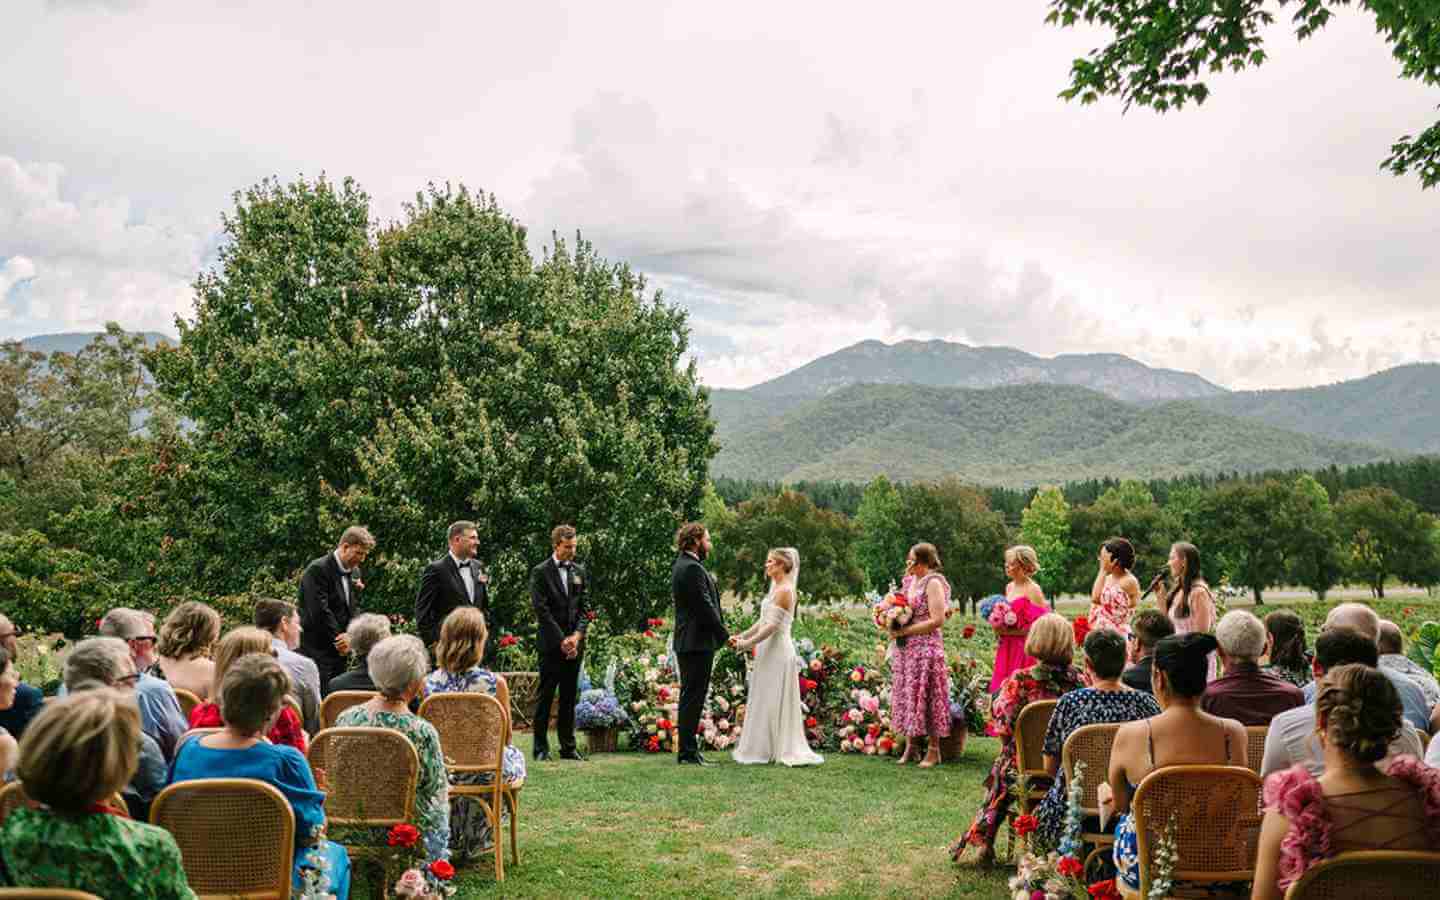 Bride and groom standing at ceremony with guests and wedding party with mountain views